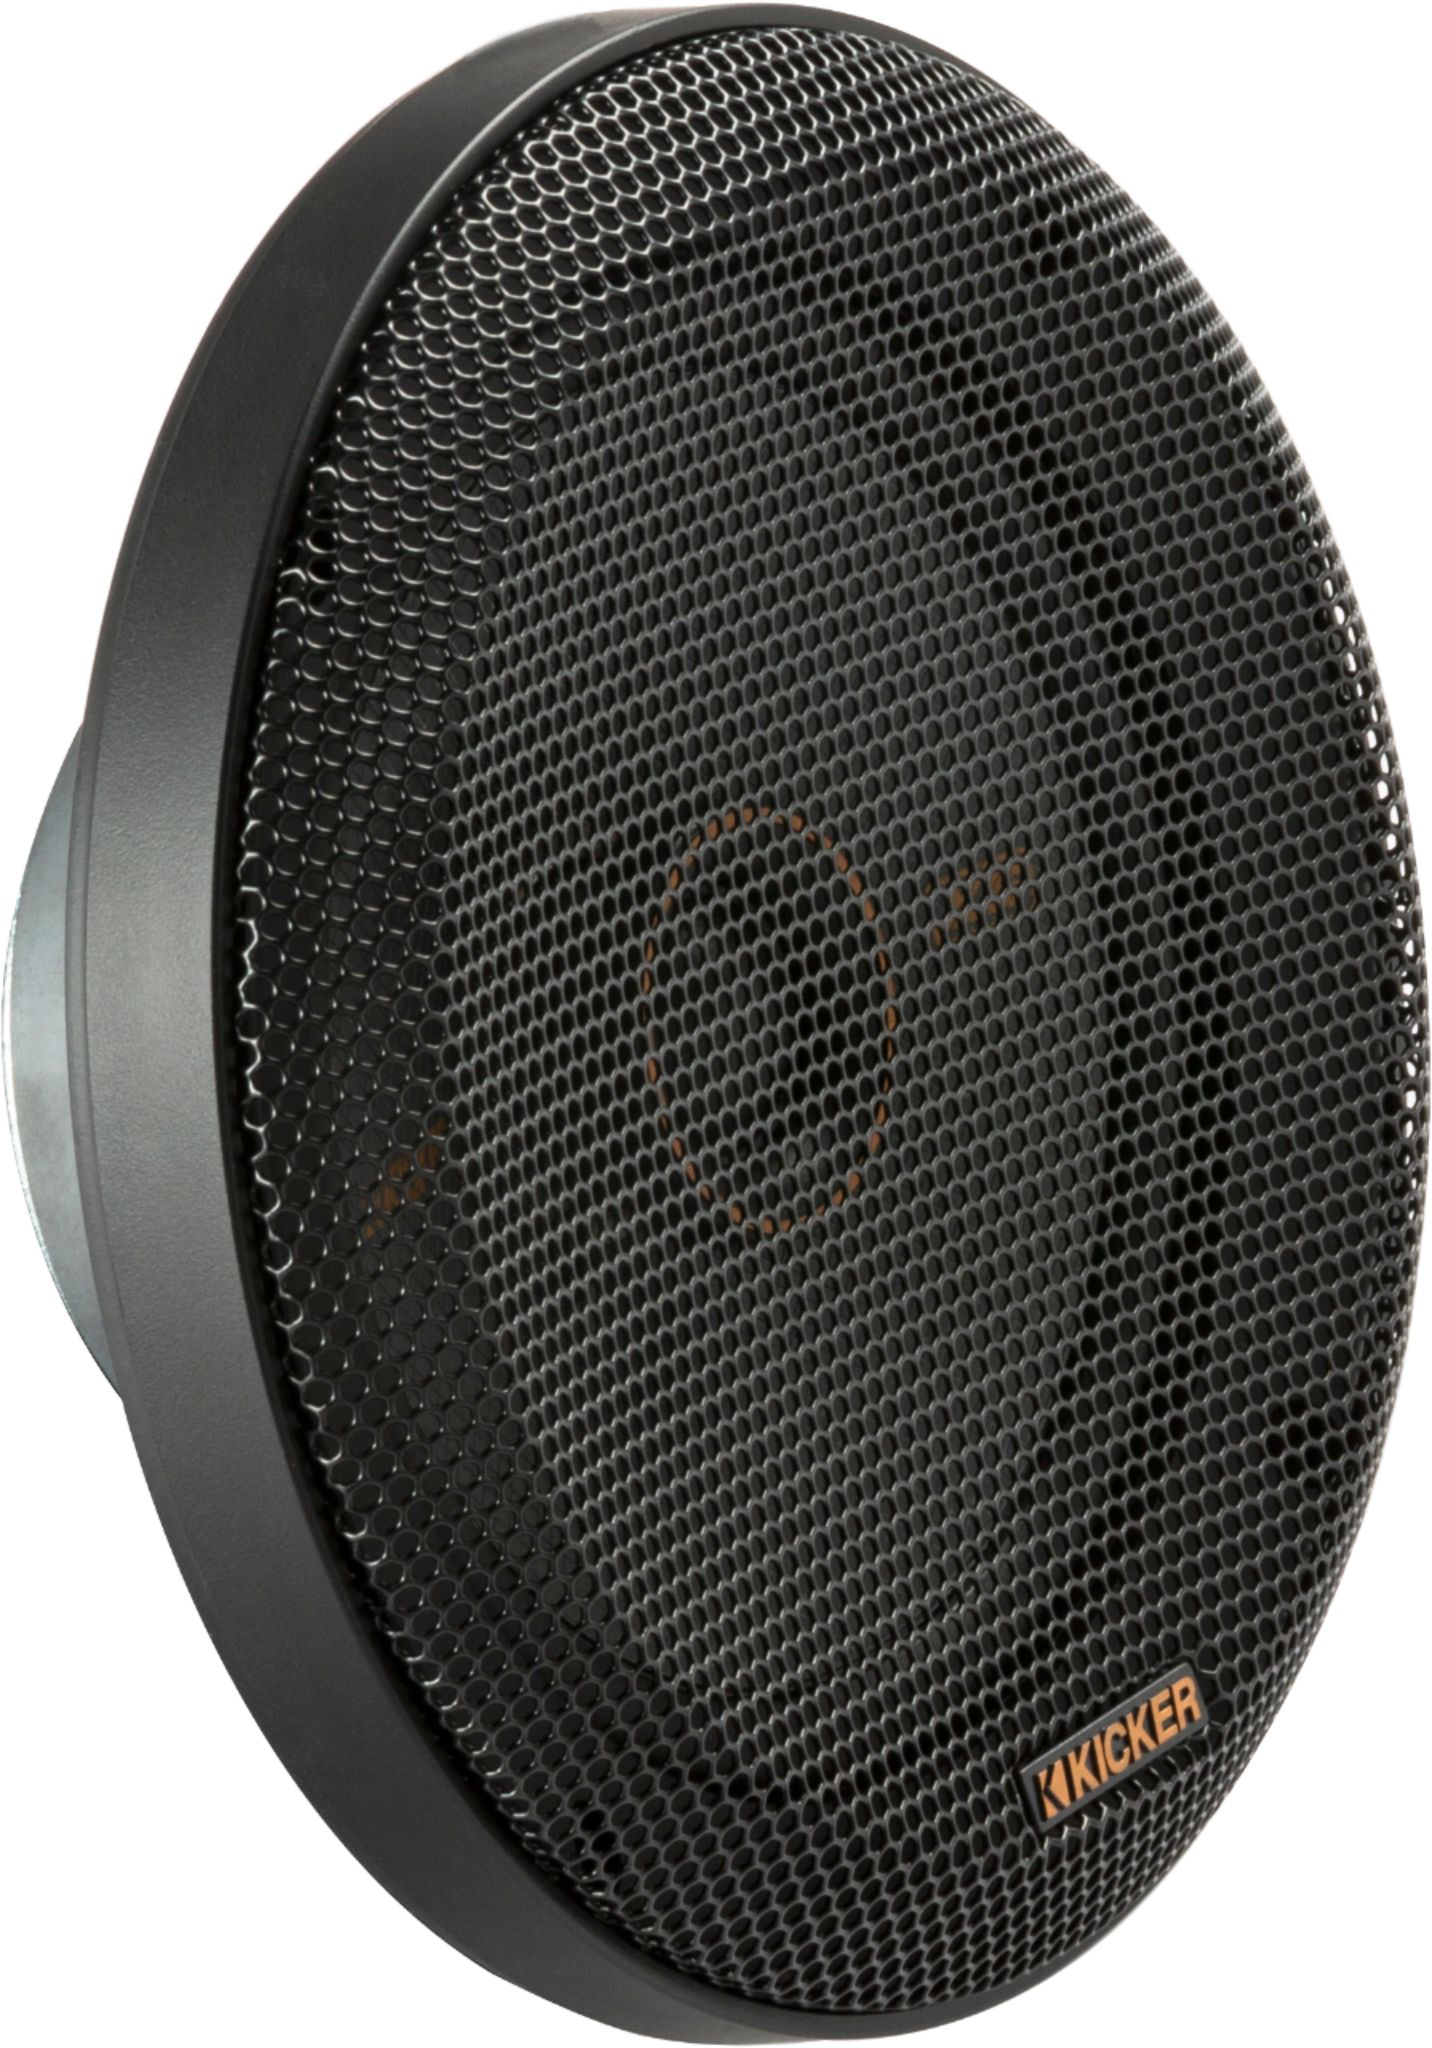 Angle View: Massive Audio - MX Series 3.5-Inch 2-Way Coaxial Speakers Pair - Black